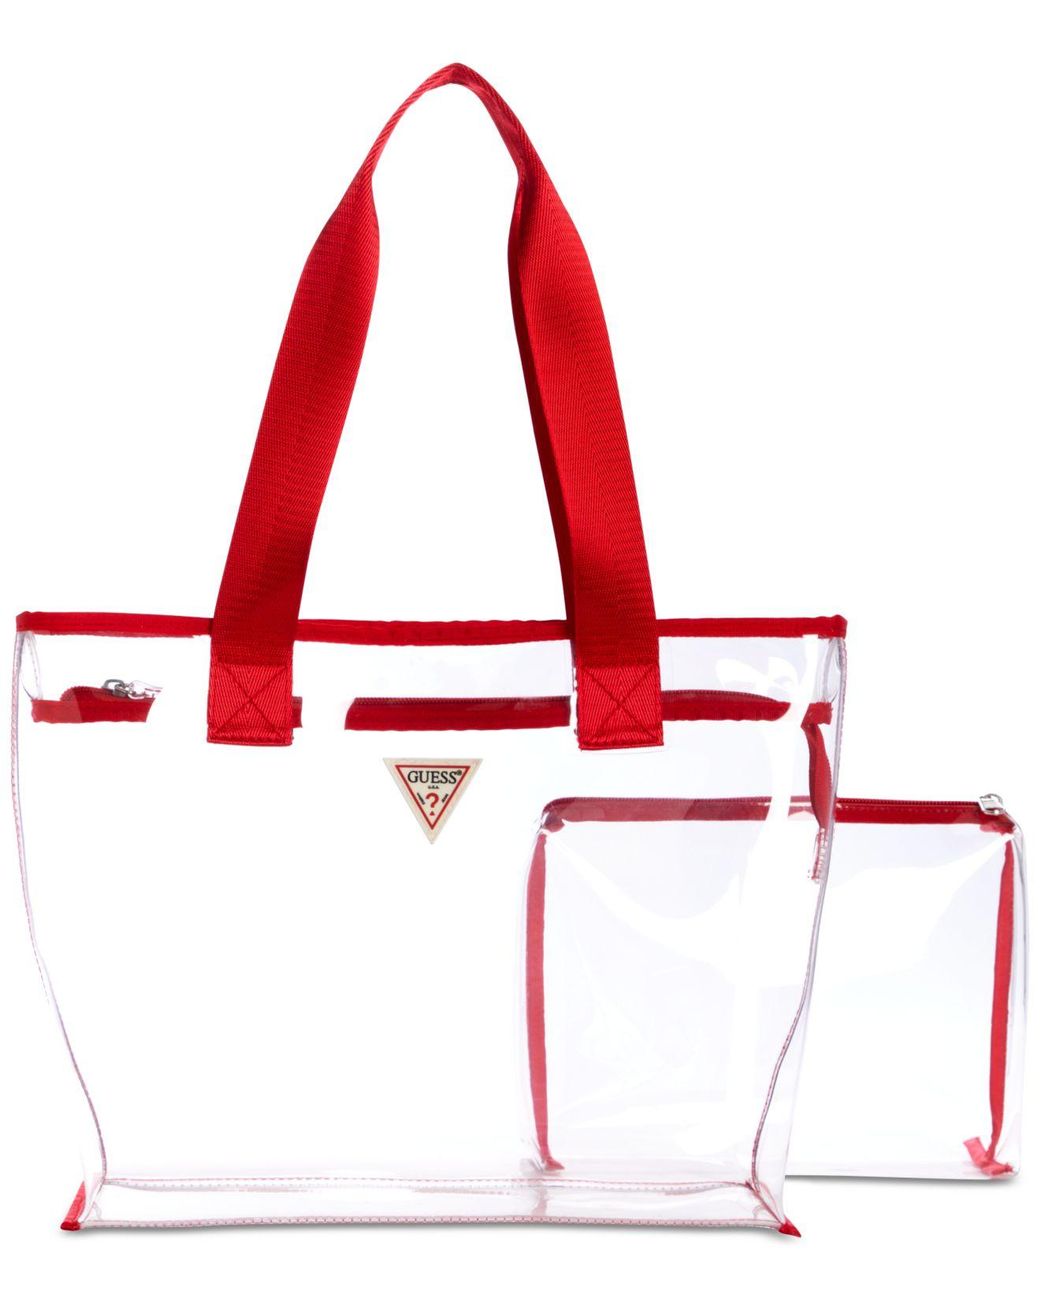 GUESS RED SHOULDER BAG/ TOTE - NEW